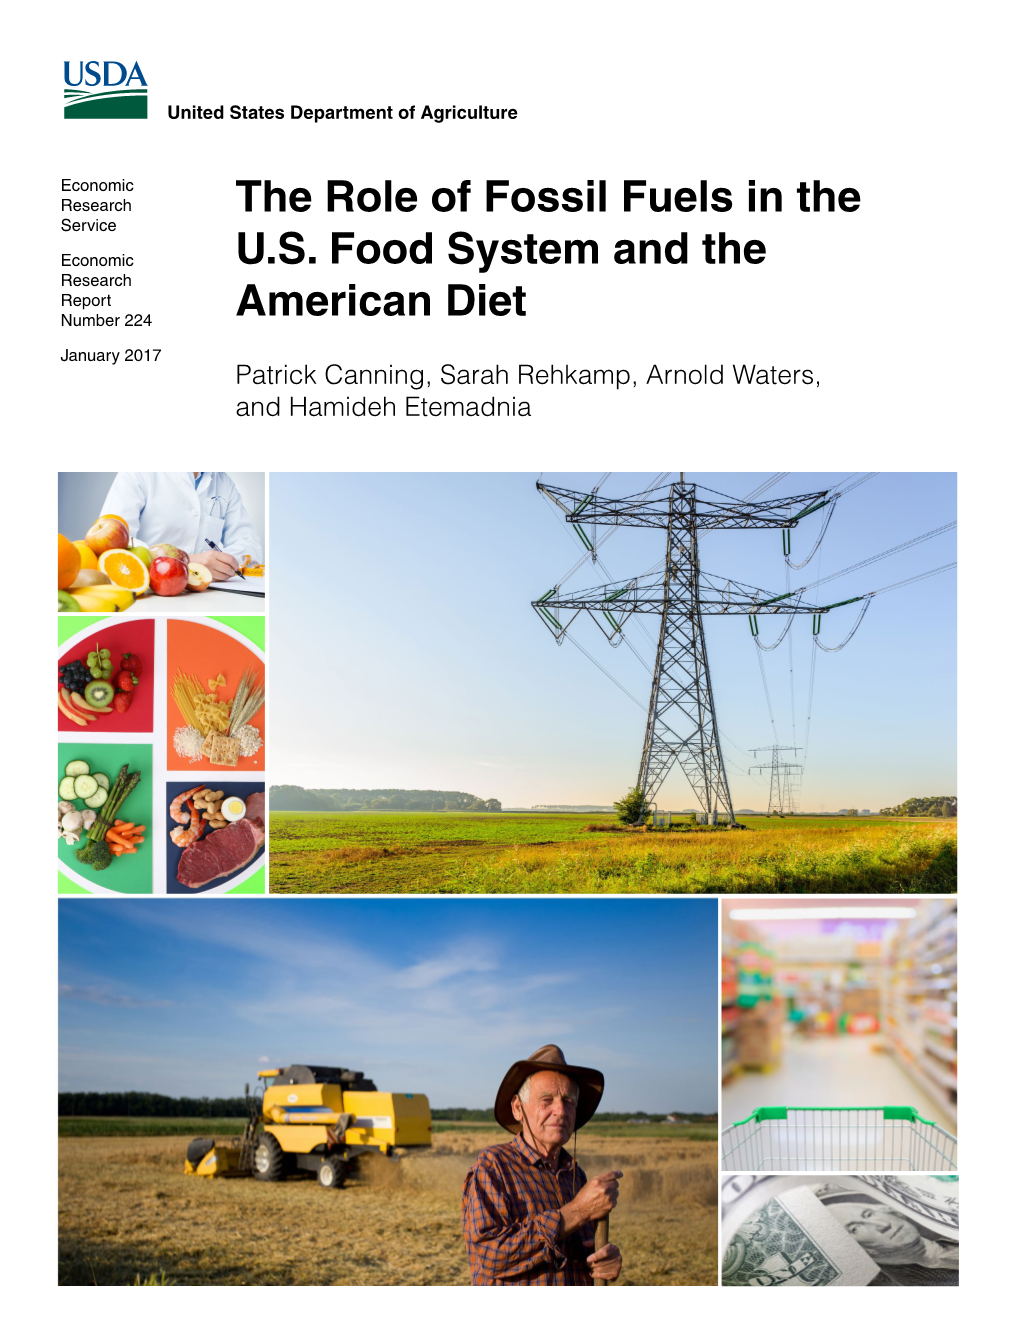 The Role of Fossil Fuels in the U.S. Food System and the American Diet, ERR-224, U.S